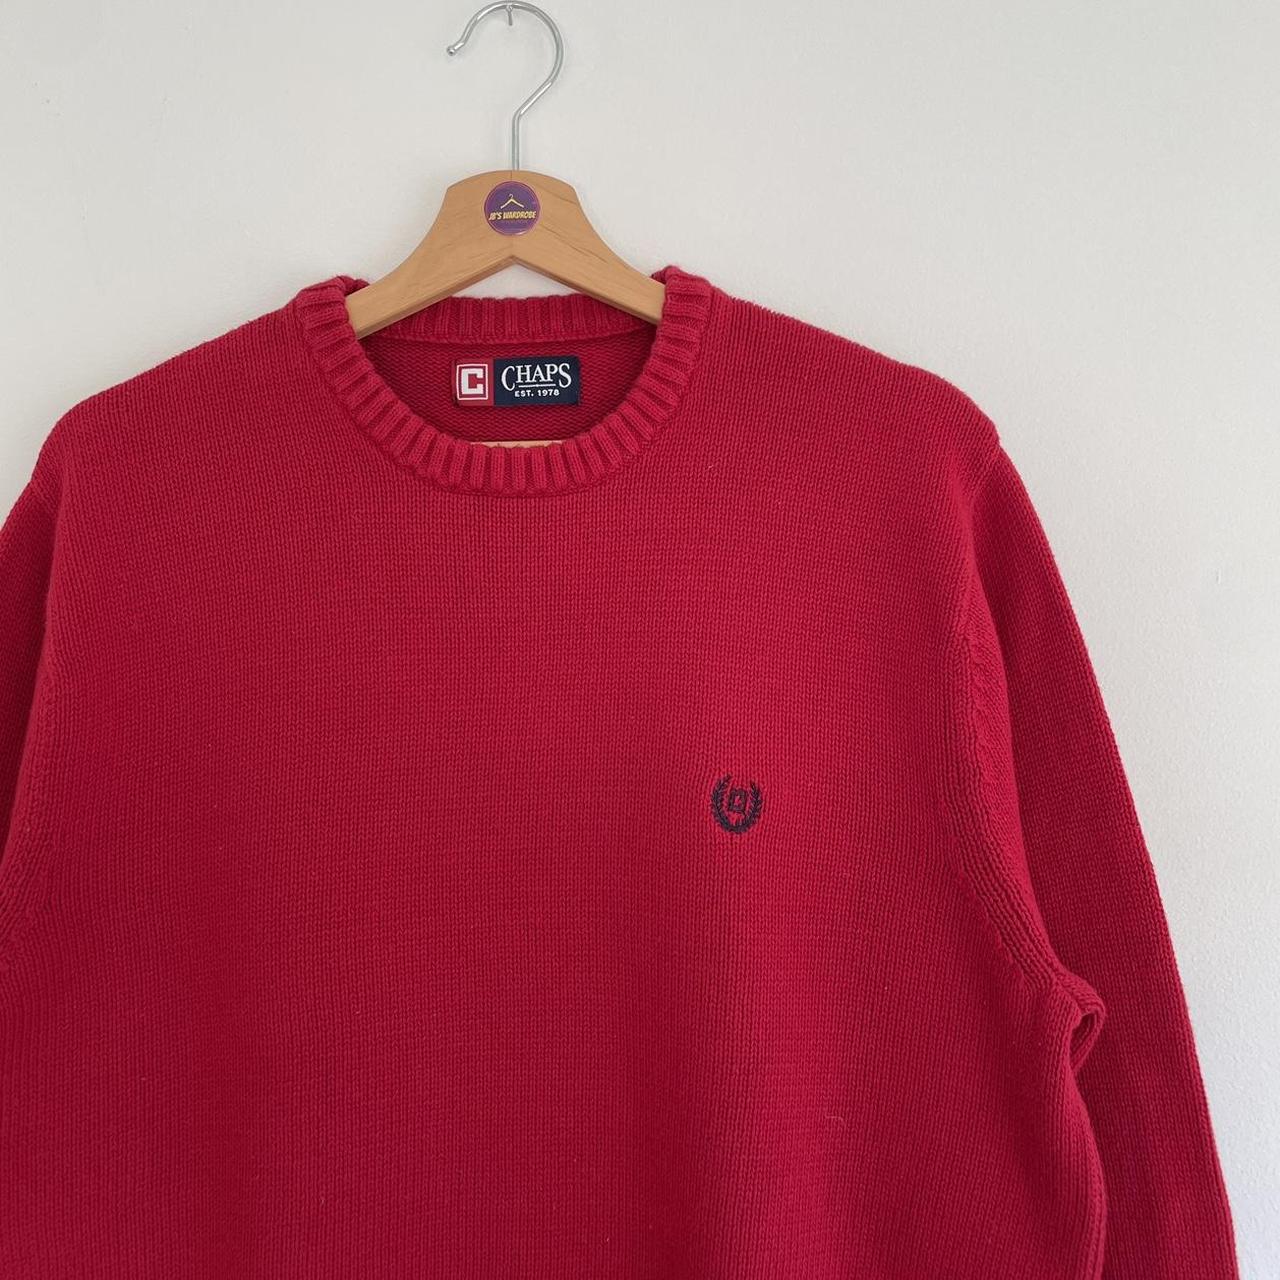 Chaps Jumper Red Classic Chaps Round Neck Knitted... - Depop